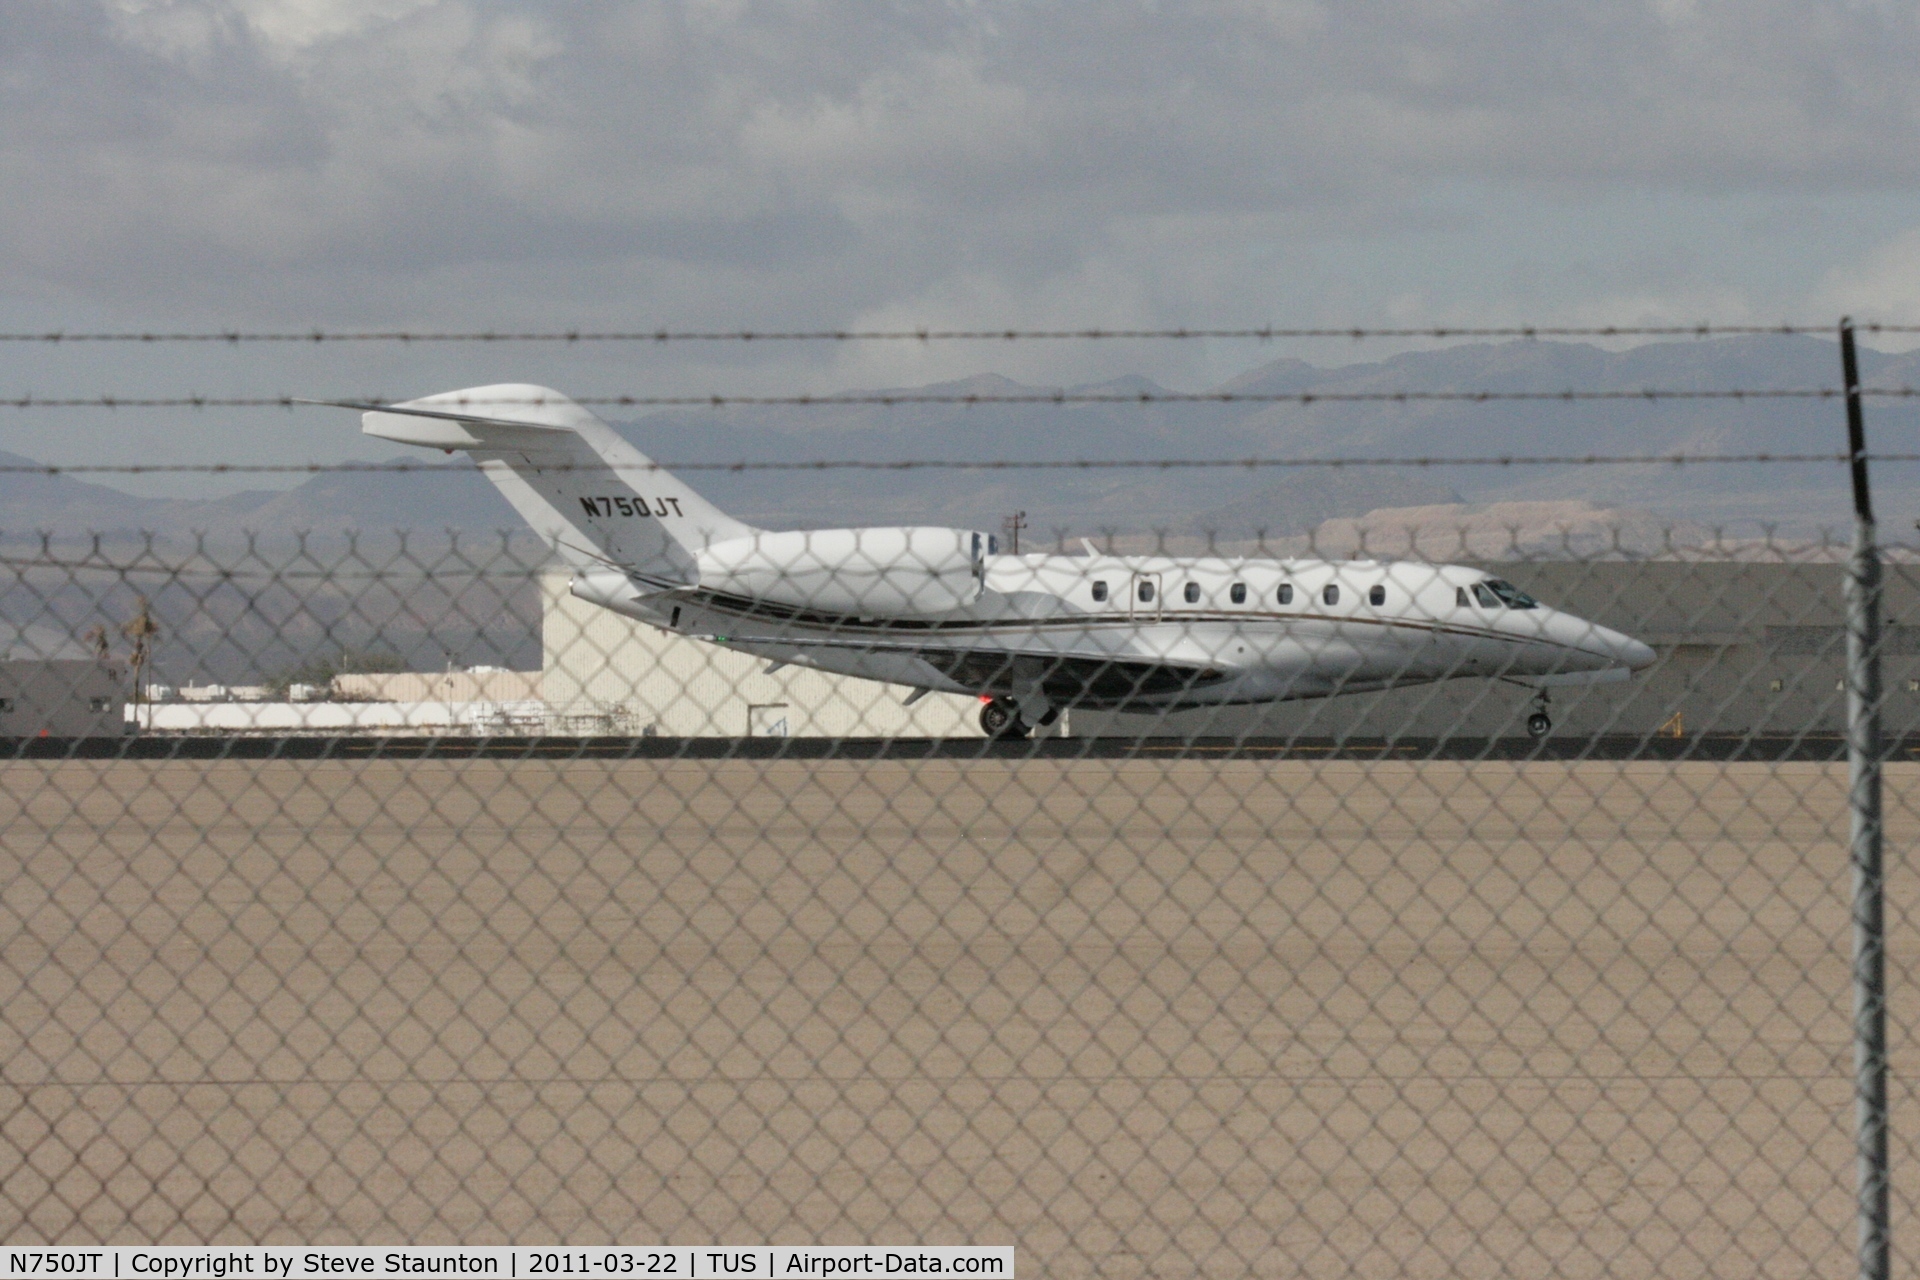 N750JT, Cessna 750 Citation X C/N 750-0302, Taken at Tucson International Airport, in March 2011 whilst on an Aeroprint Aviation tour